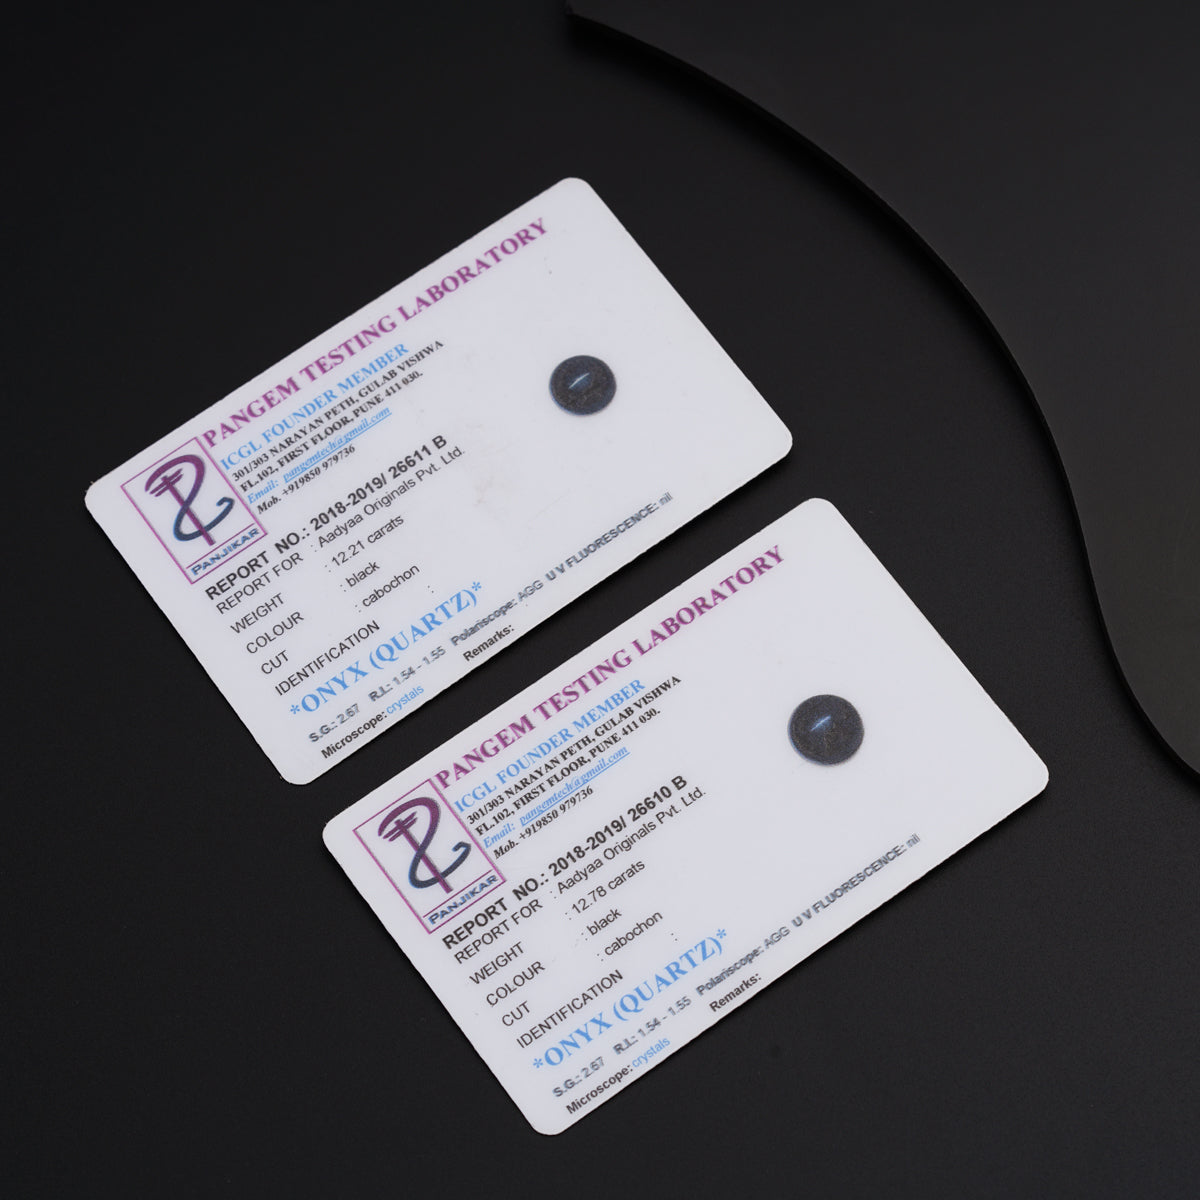 two business cards sitting next to a computer mouse